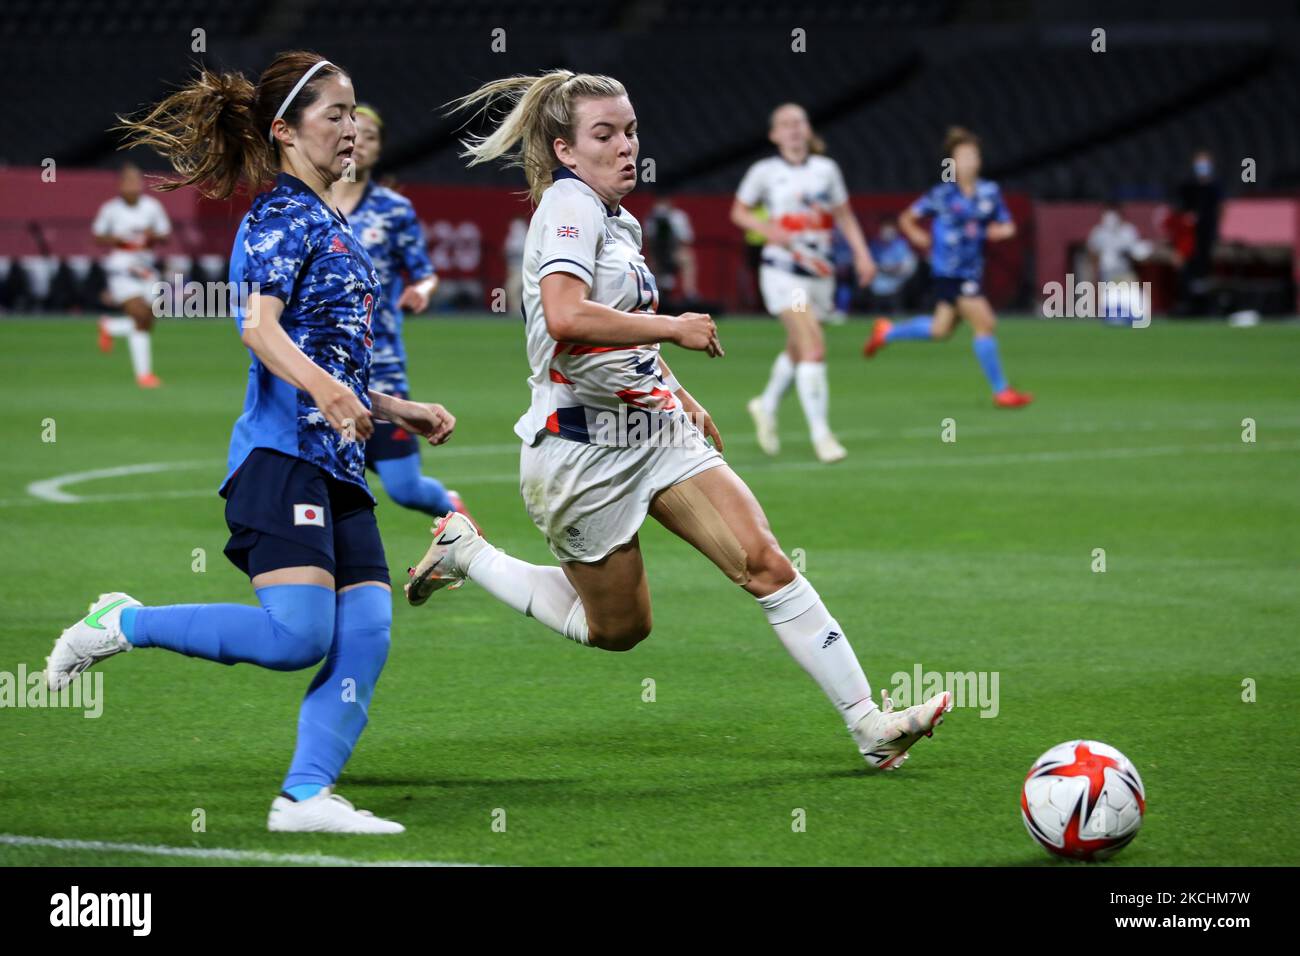 (2) Risa SHIMIZU of Team Japan is challenged by (15) Lauren HEMP of Team Great Britain during the Women's First Round Group E match between Japan and Great Britain on day one of the Tokyo 2020 Olympic Games at Sapporo Dome Stadium (Photo by Ayman Aref/NurPhoto) Stock Photo